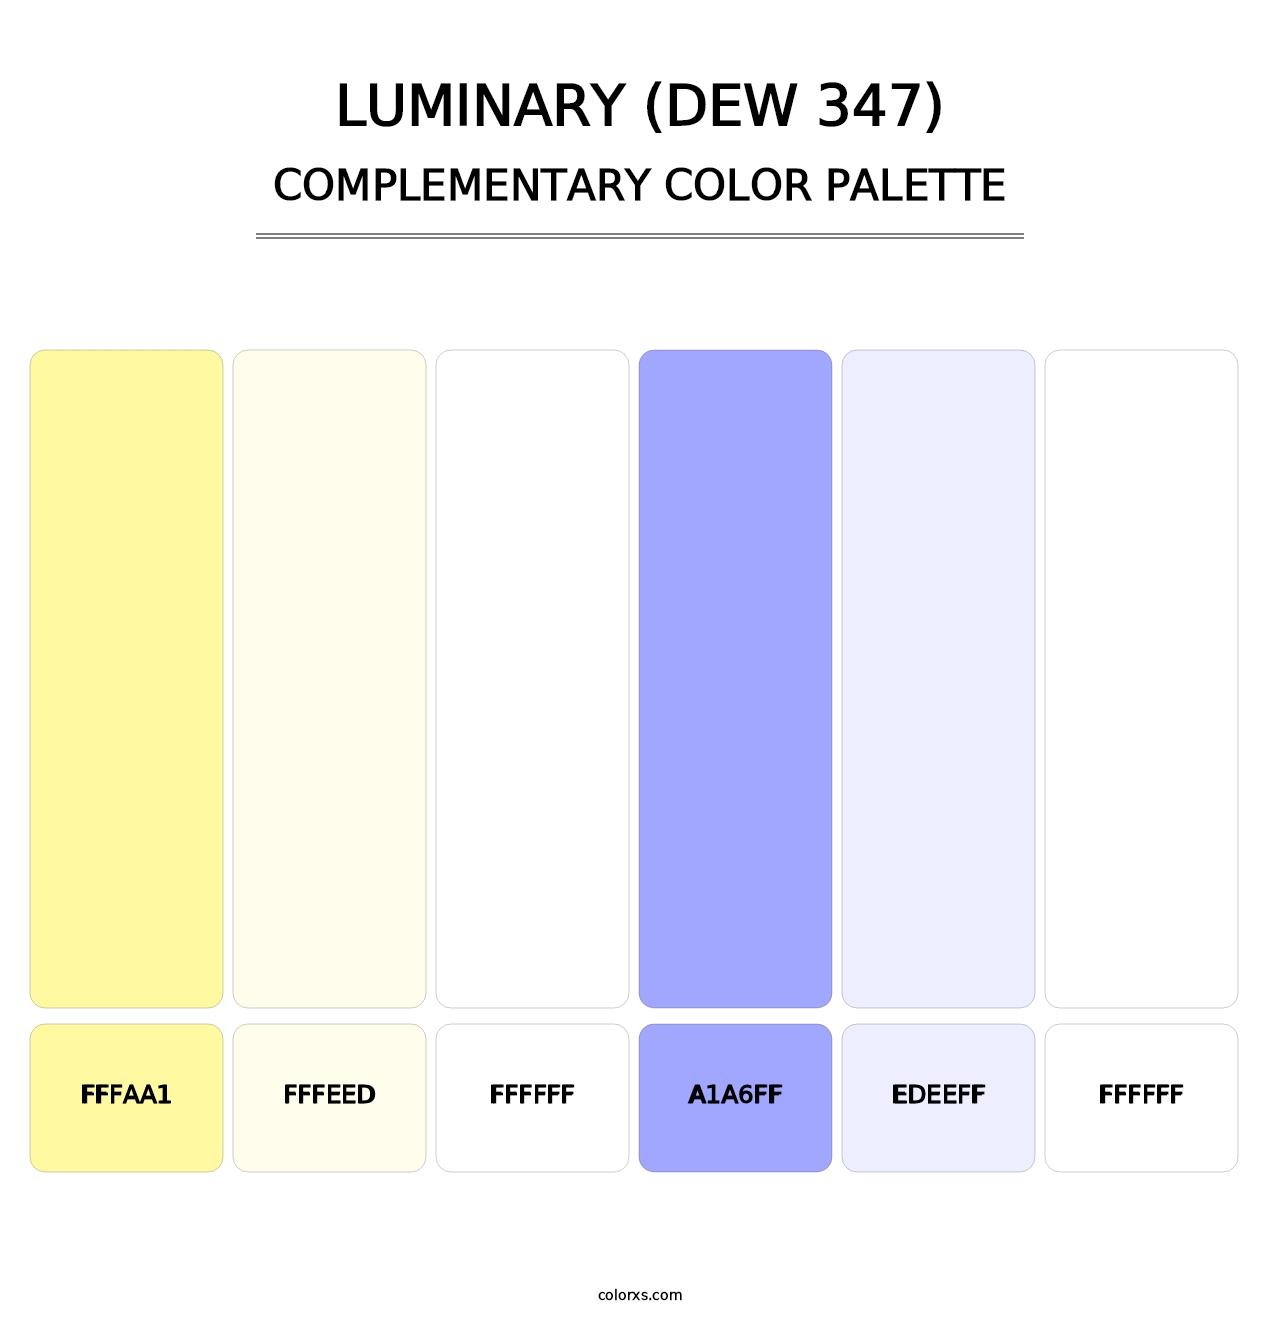 Luminary (DEW 347) - Complementary Color Palette